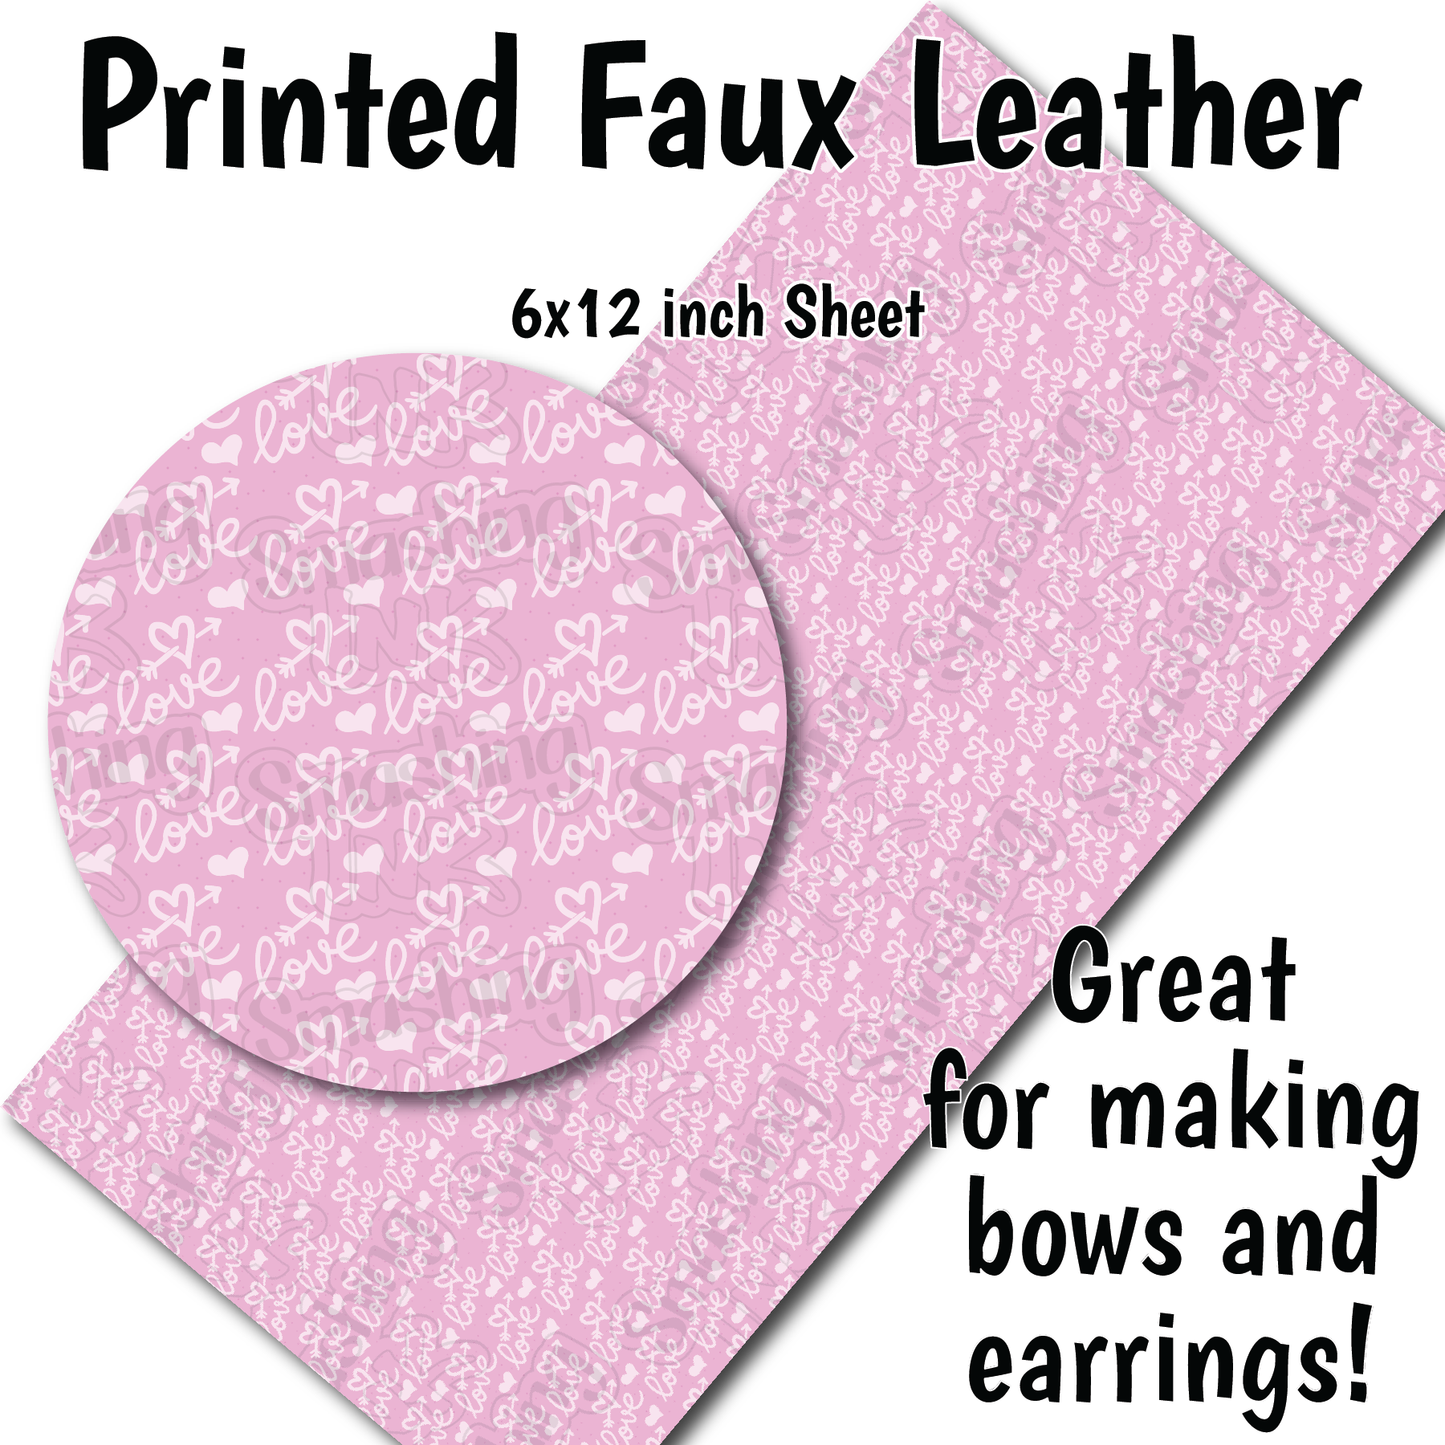 Pink Hearts Pattern Q - Faux Leather Sheet (SHIPS IN 3 BUS DAYS)